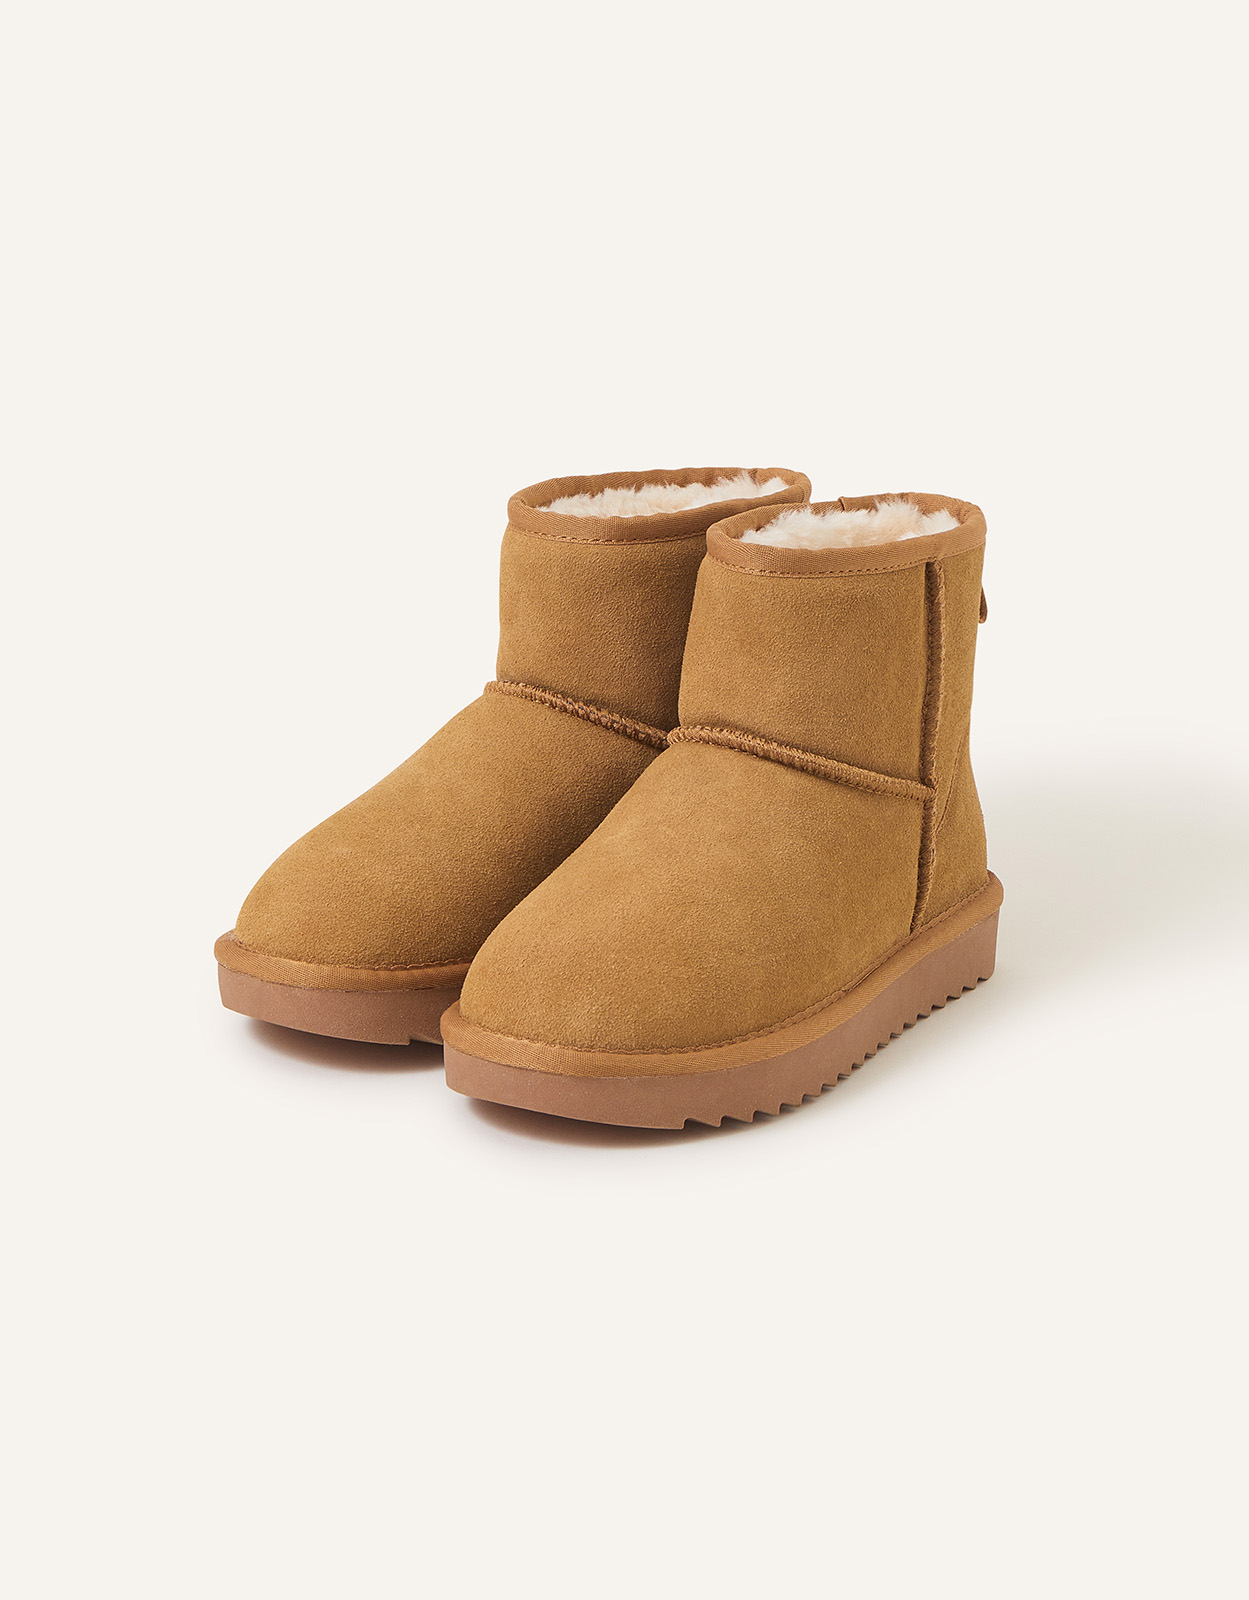 Accessorize Mid Suede Boots Tan, Size: 41